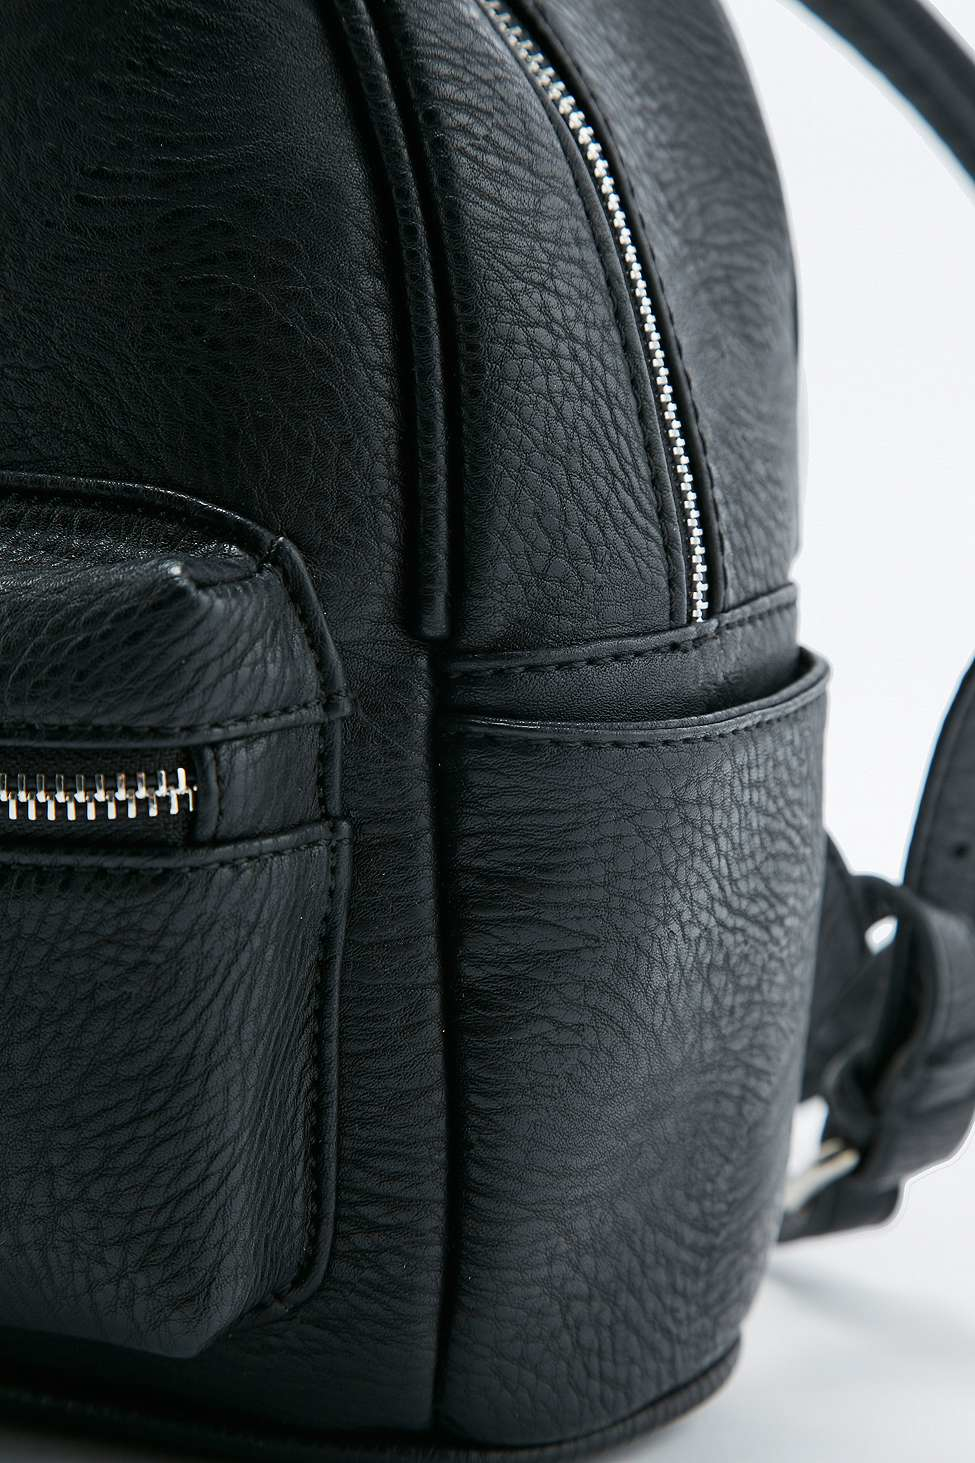 Urban Outfitters Black Faux-leather Mini Backpack - Lyst